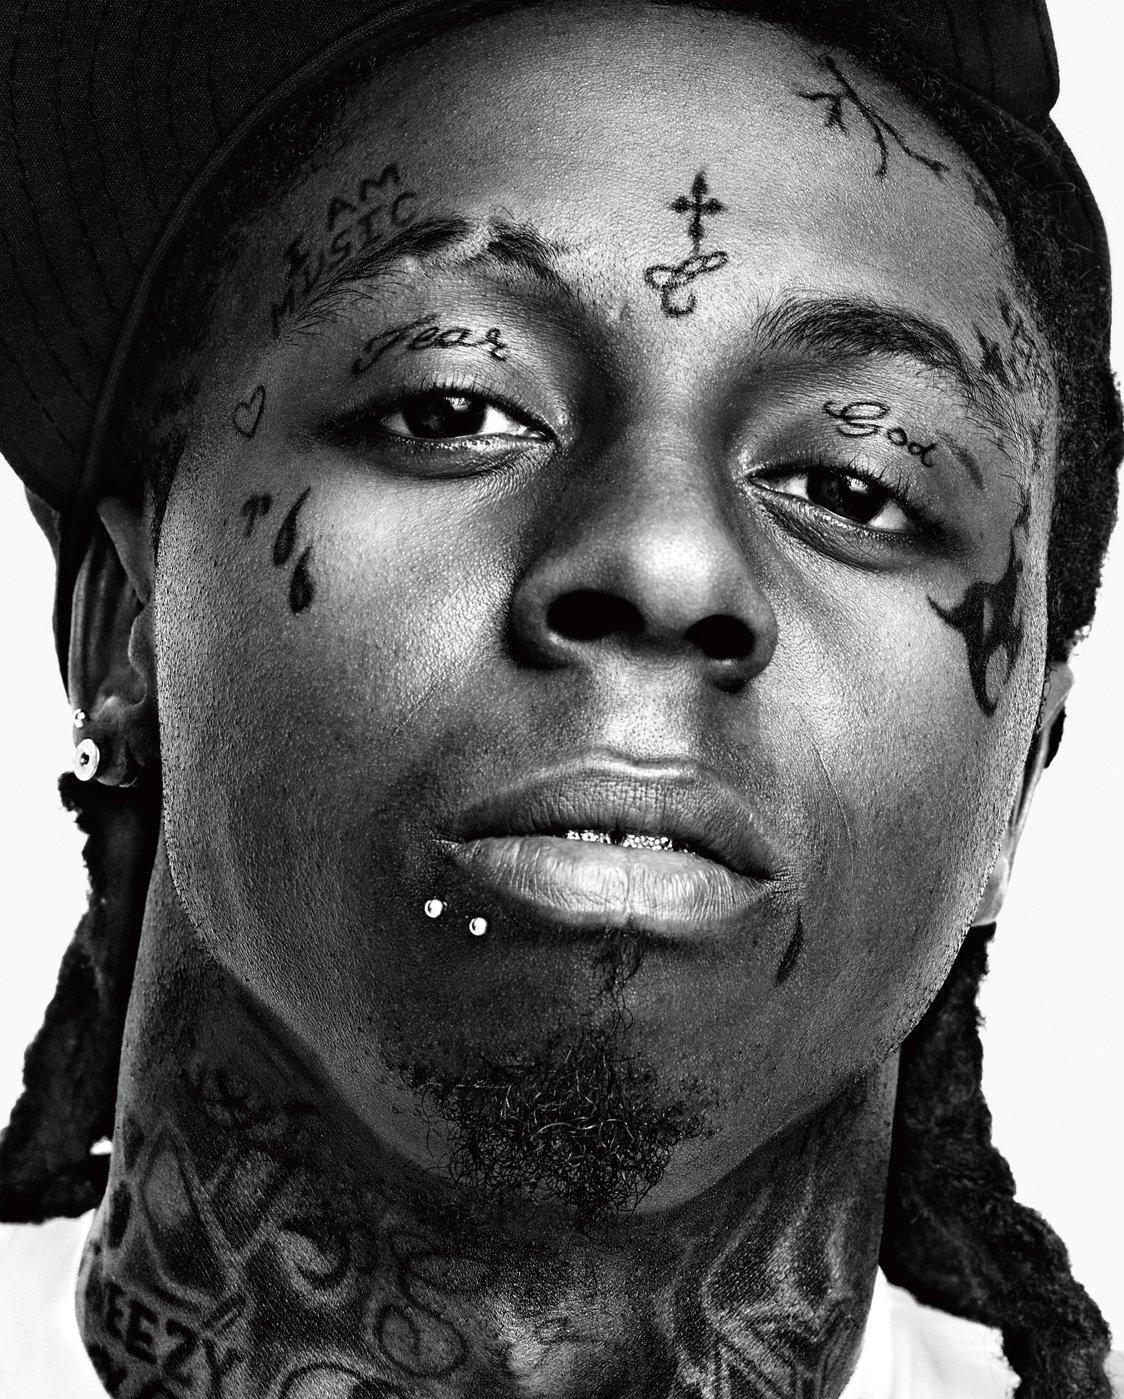 weezy face tattoo